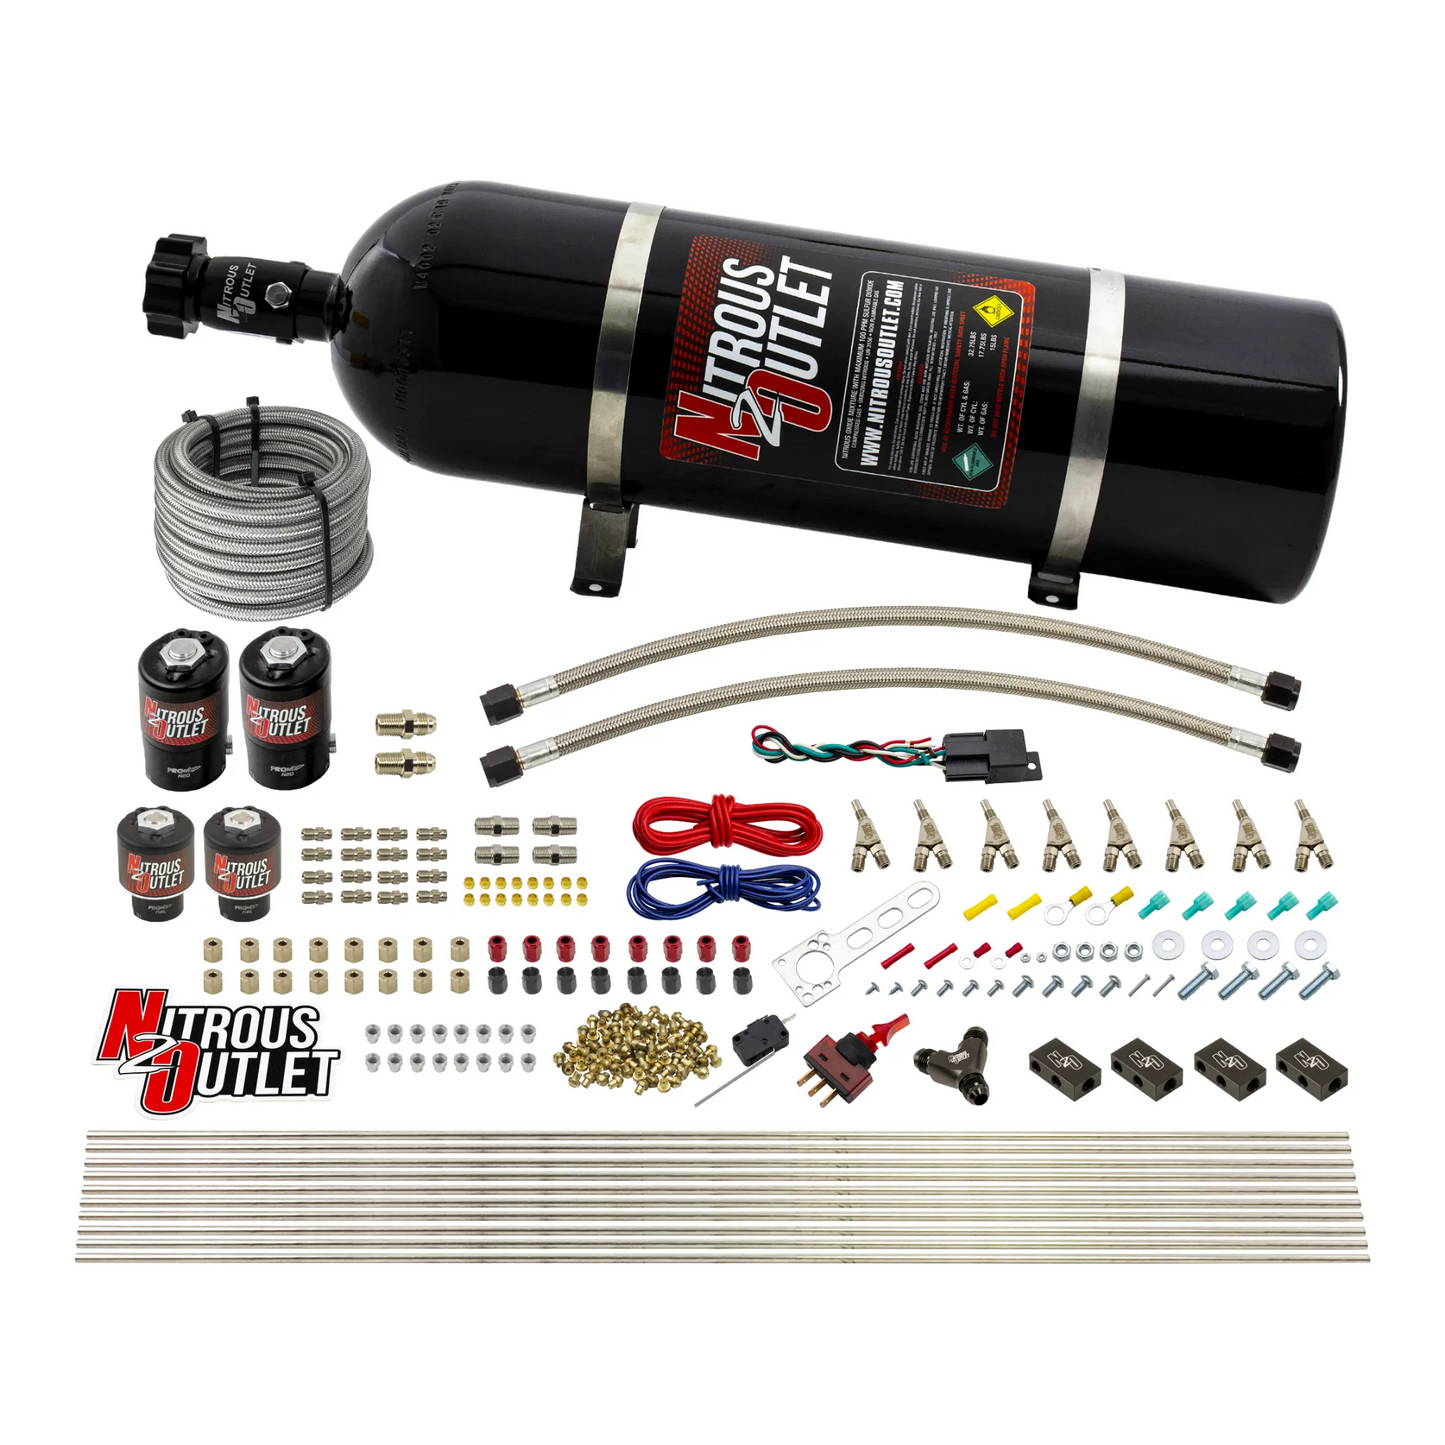 8 Cylinder Single Stage Direct Port Nitrous System - .122 Nitrous/.177 Fuel Solenoids - Straight Blow Through Nozzles